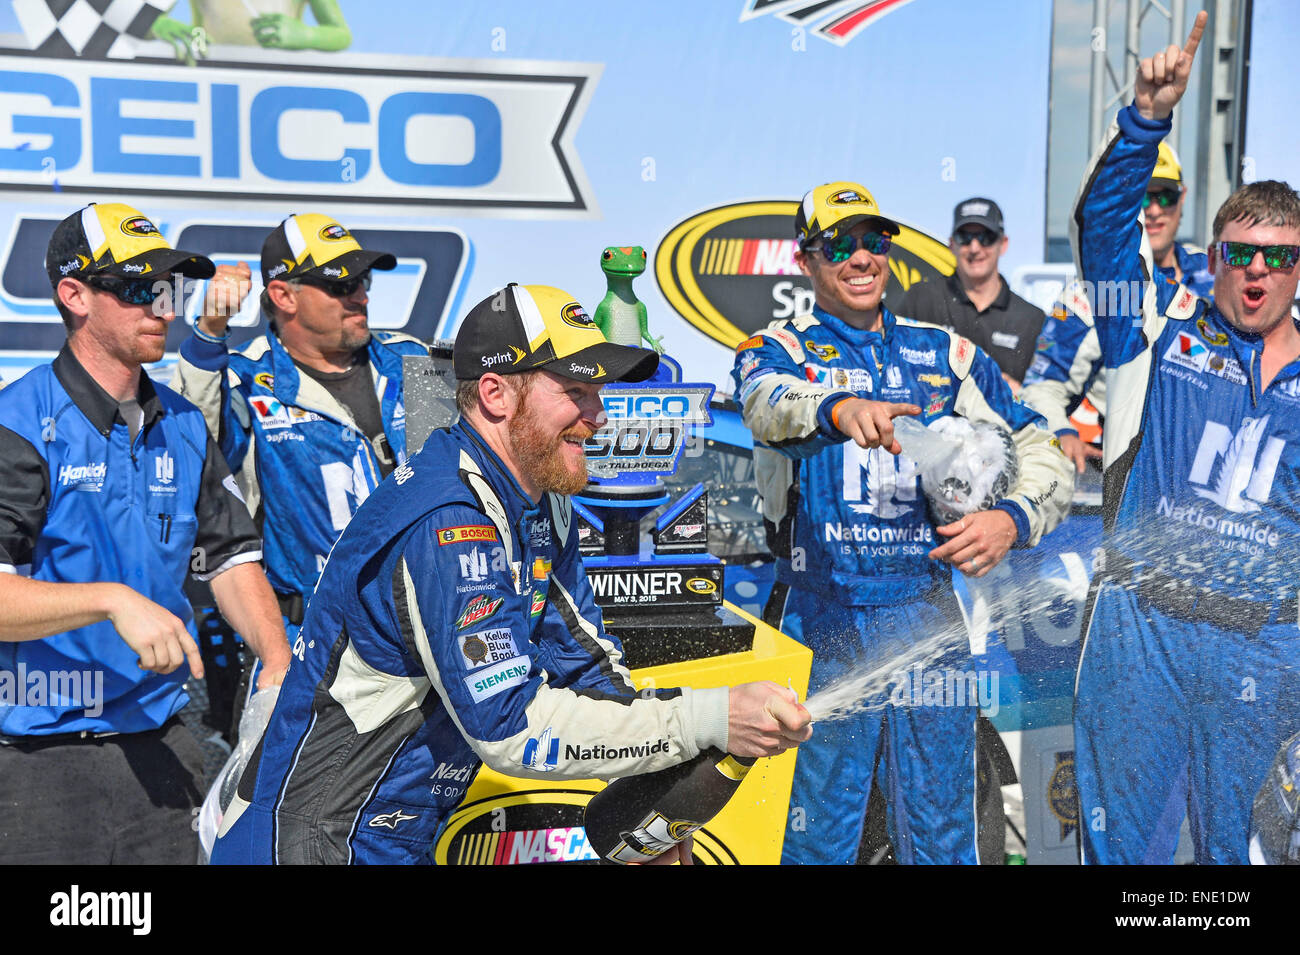 Talladega, AL, USA. 3rd May, 2015. Talladega, AL - May 03, 2015: Dale Earnhardt Jr. (88) celebrates his victory by spraying champagne on his team mates of the GEICO 500 in victory lane at Talladega Superspeedway in Talladega, AL. Credit:  csm/Alamy Live News Stock Photo